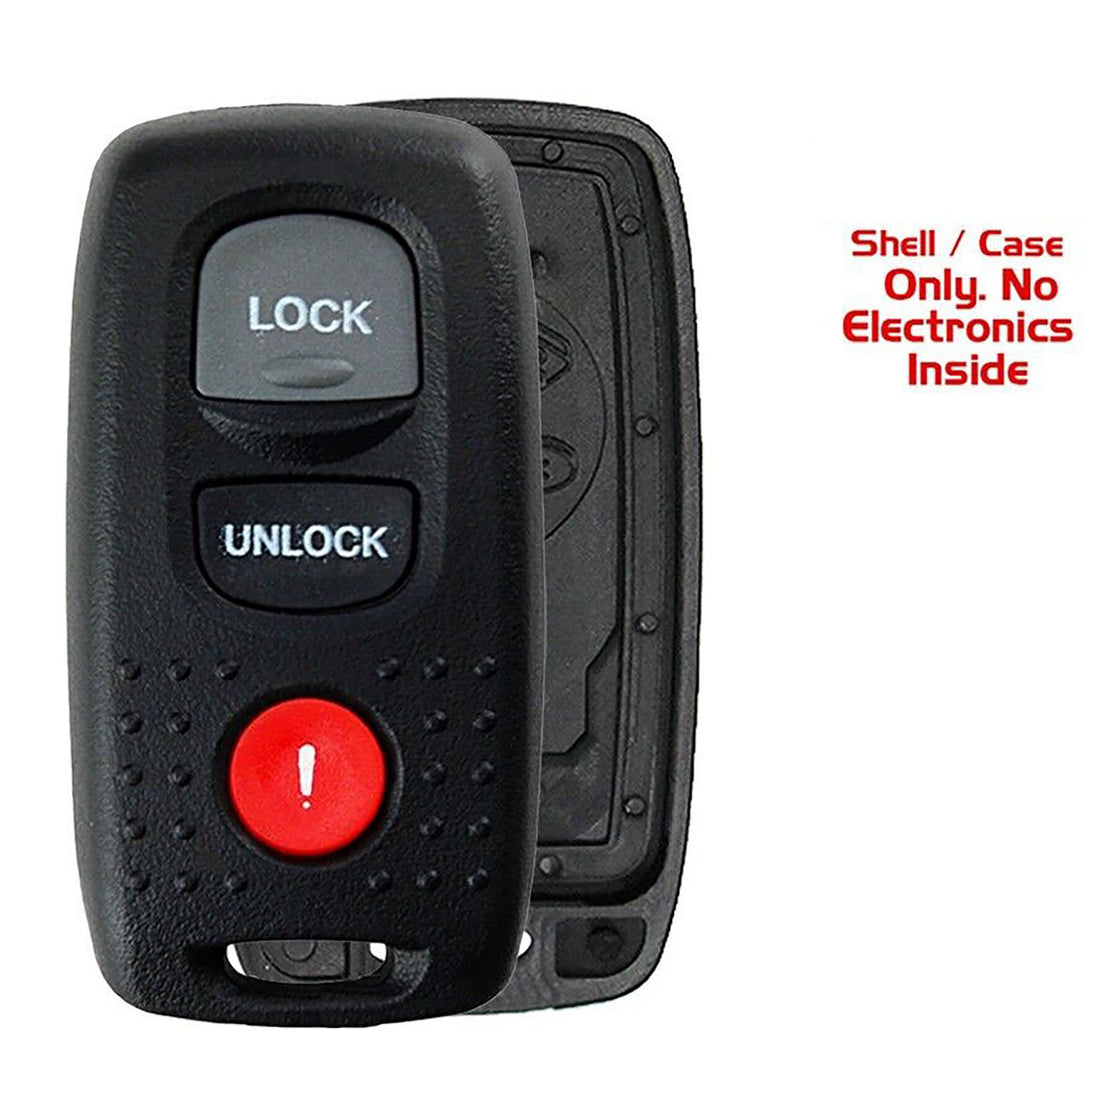 1x New Quality Replacement Key Fob Remote SHELL / CASE Compatible with & Fit For Mazda Vehicles - MPN KPU41846-04 (NO electronics or Chip inside)